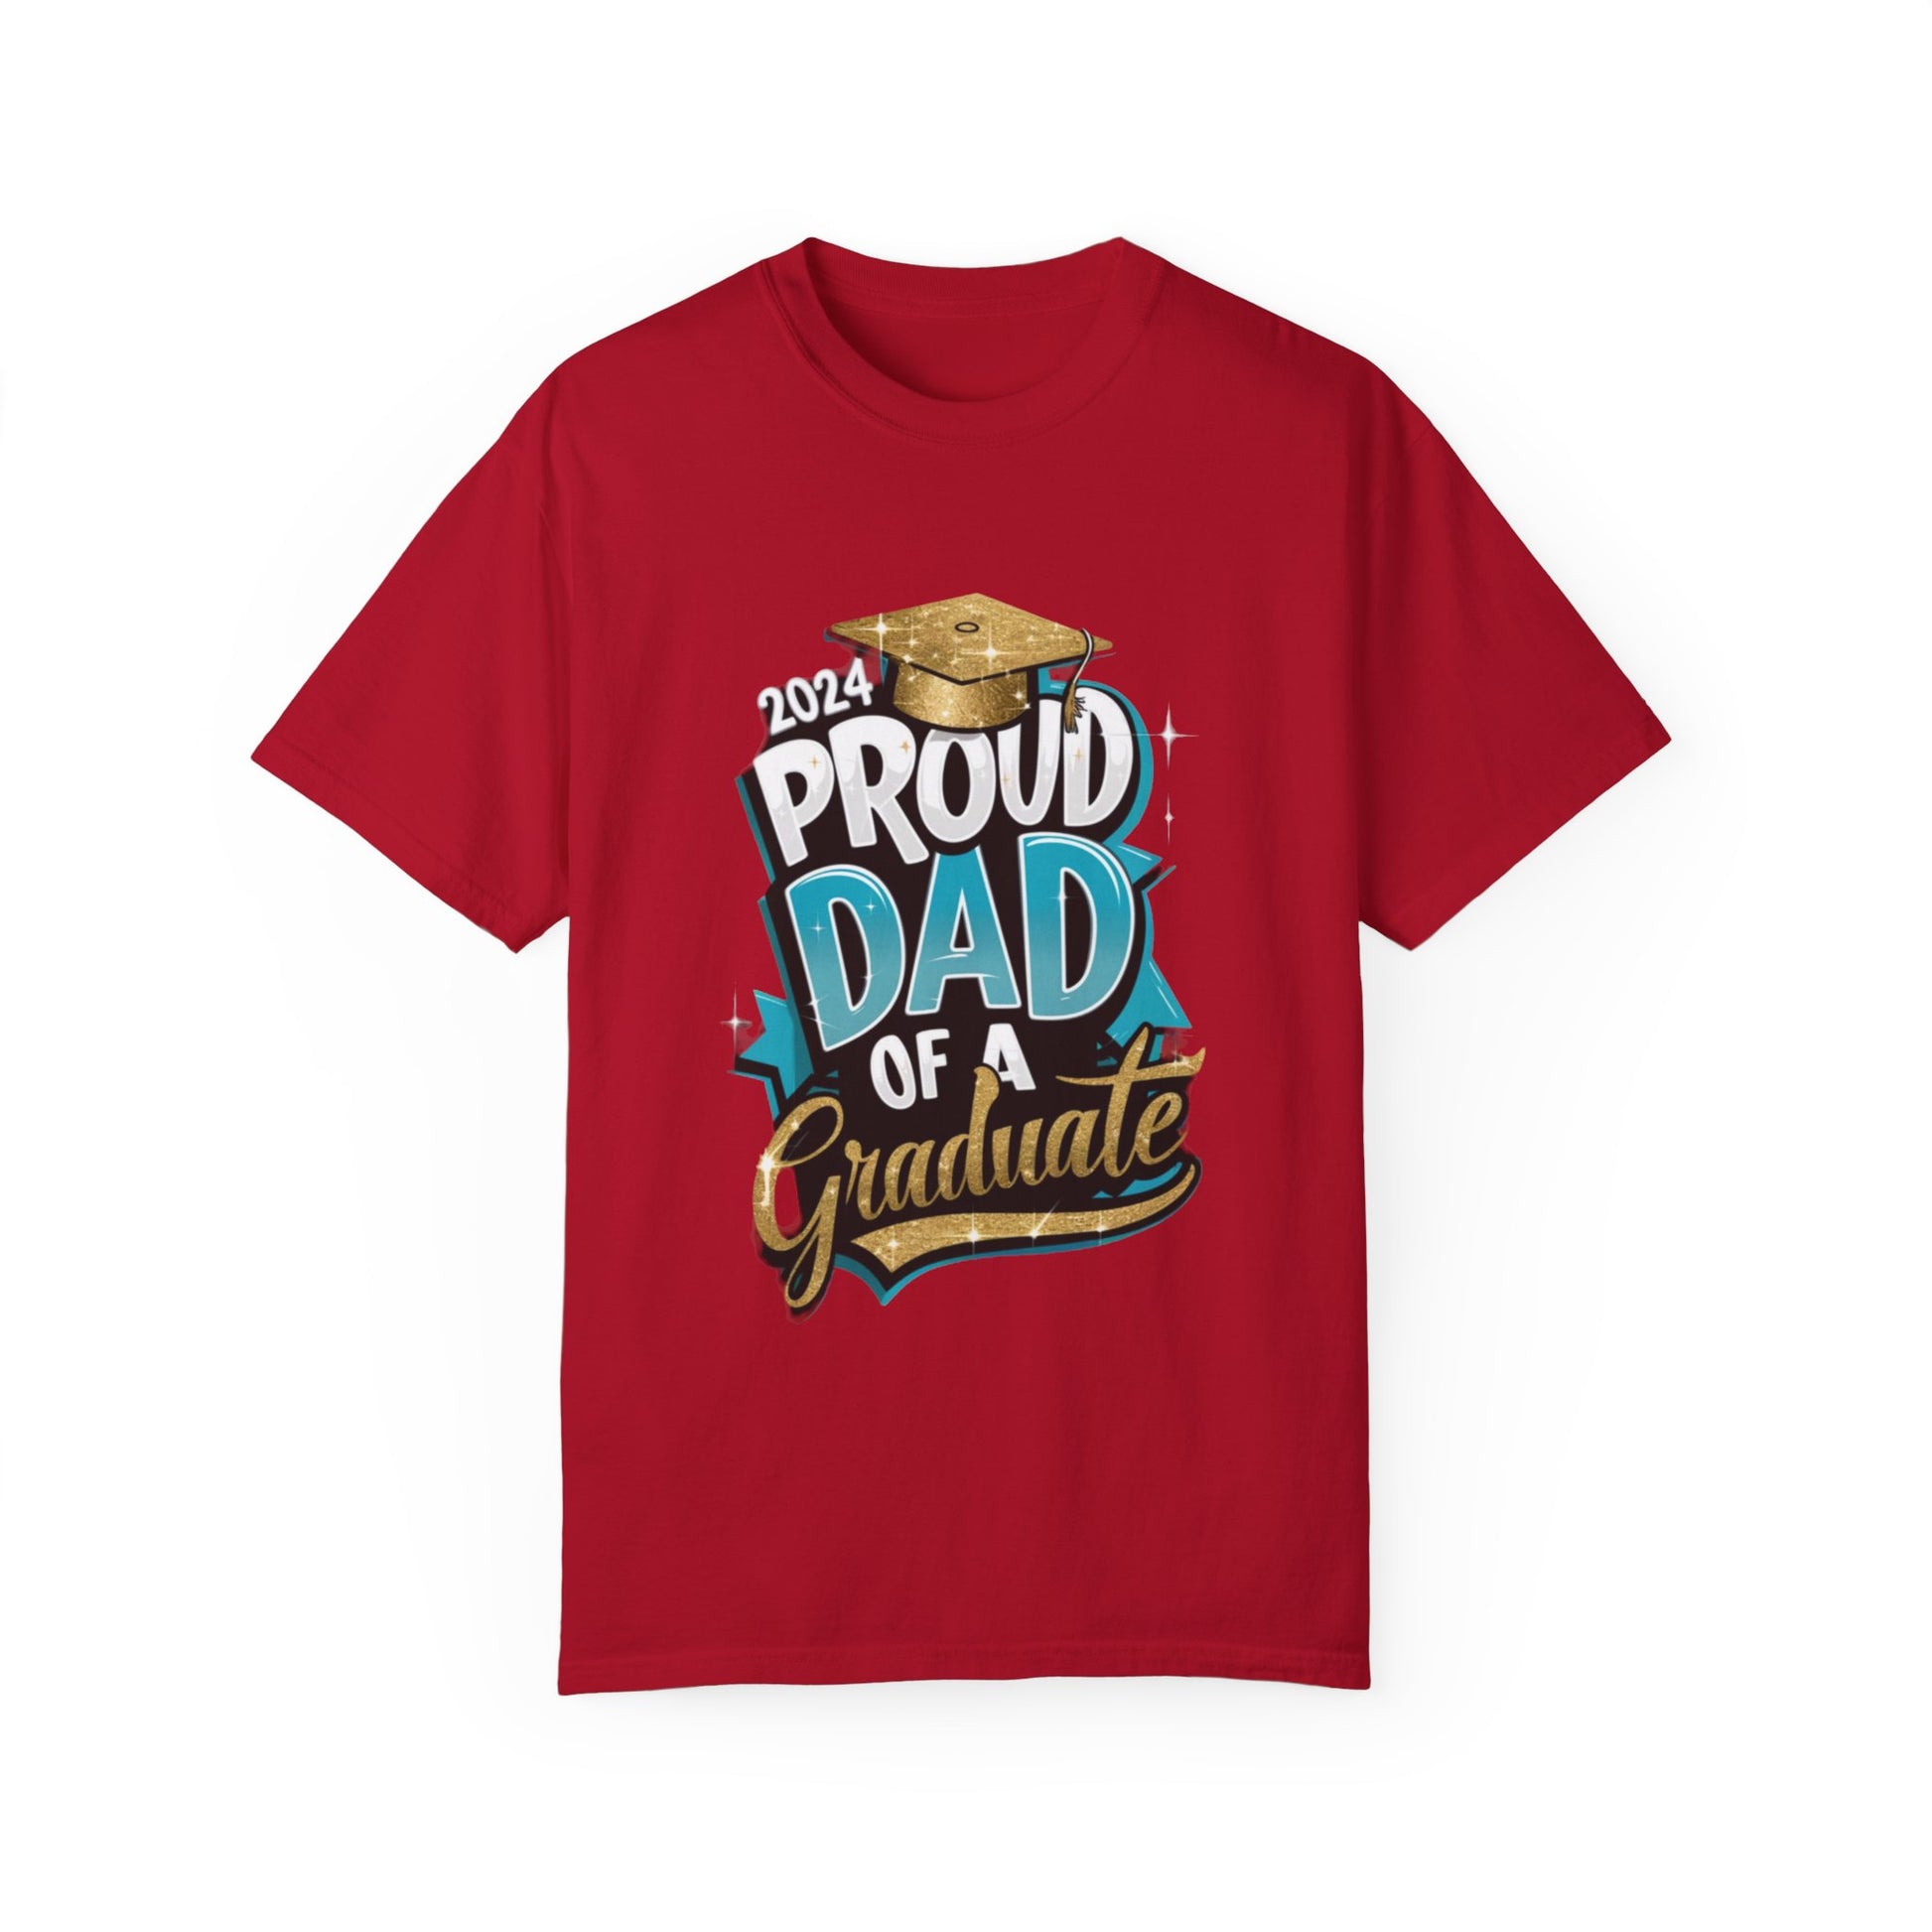 Proud Dad of a 2024 Graduate Unisex Garment-dyed T-shirt Cotton Funny Humorous Graphic Soft Premium Unisex Men Women Red T-shirt Birthday Gift-2